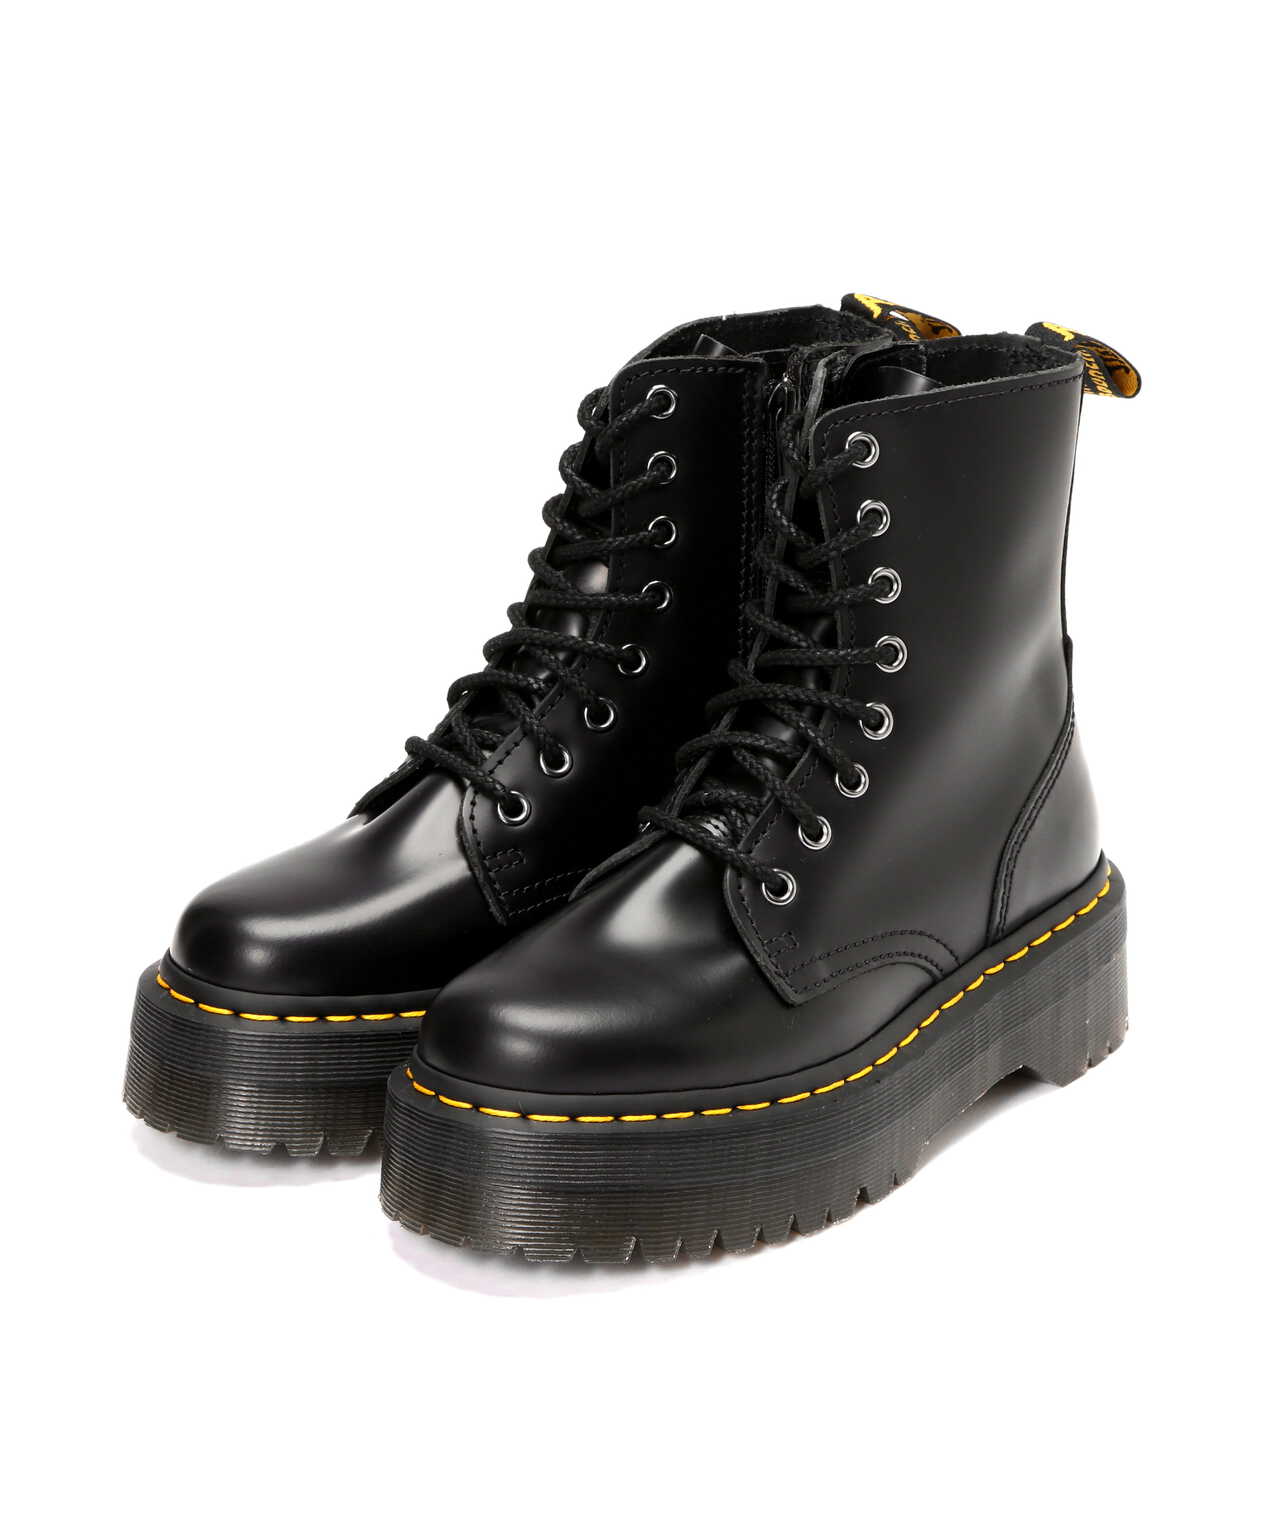 SALE2023】 Dr.Martens - Dr.Martins ブーツの通販 by にわとり's shop ...